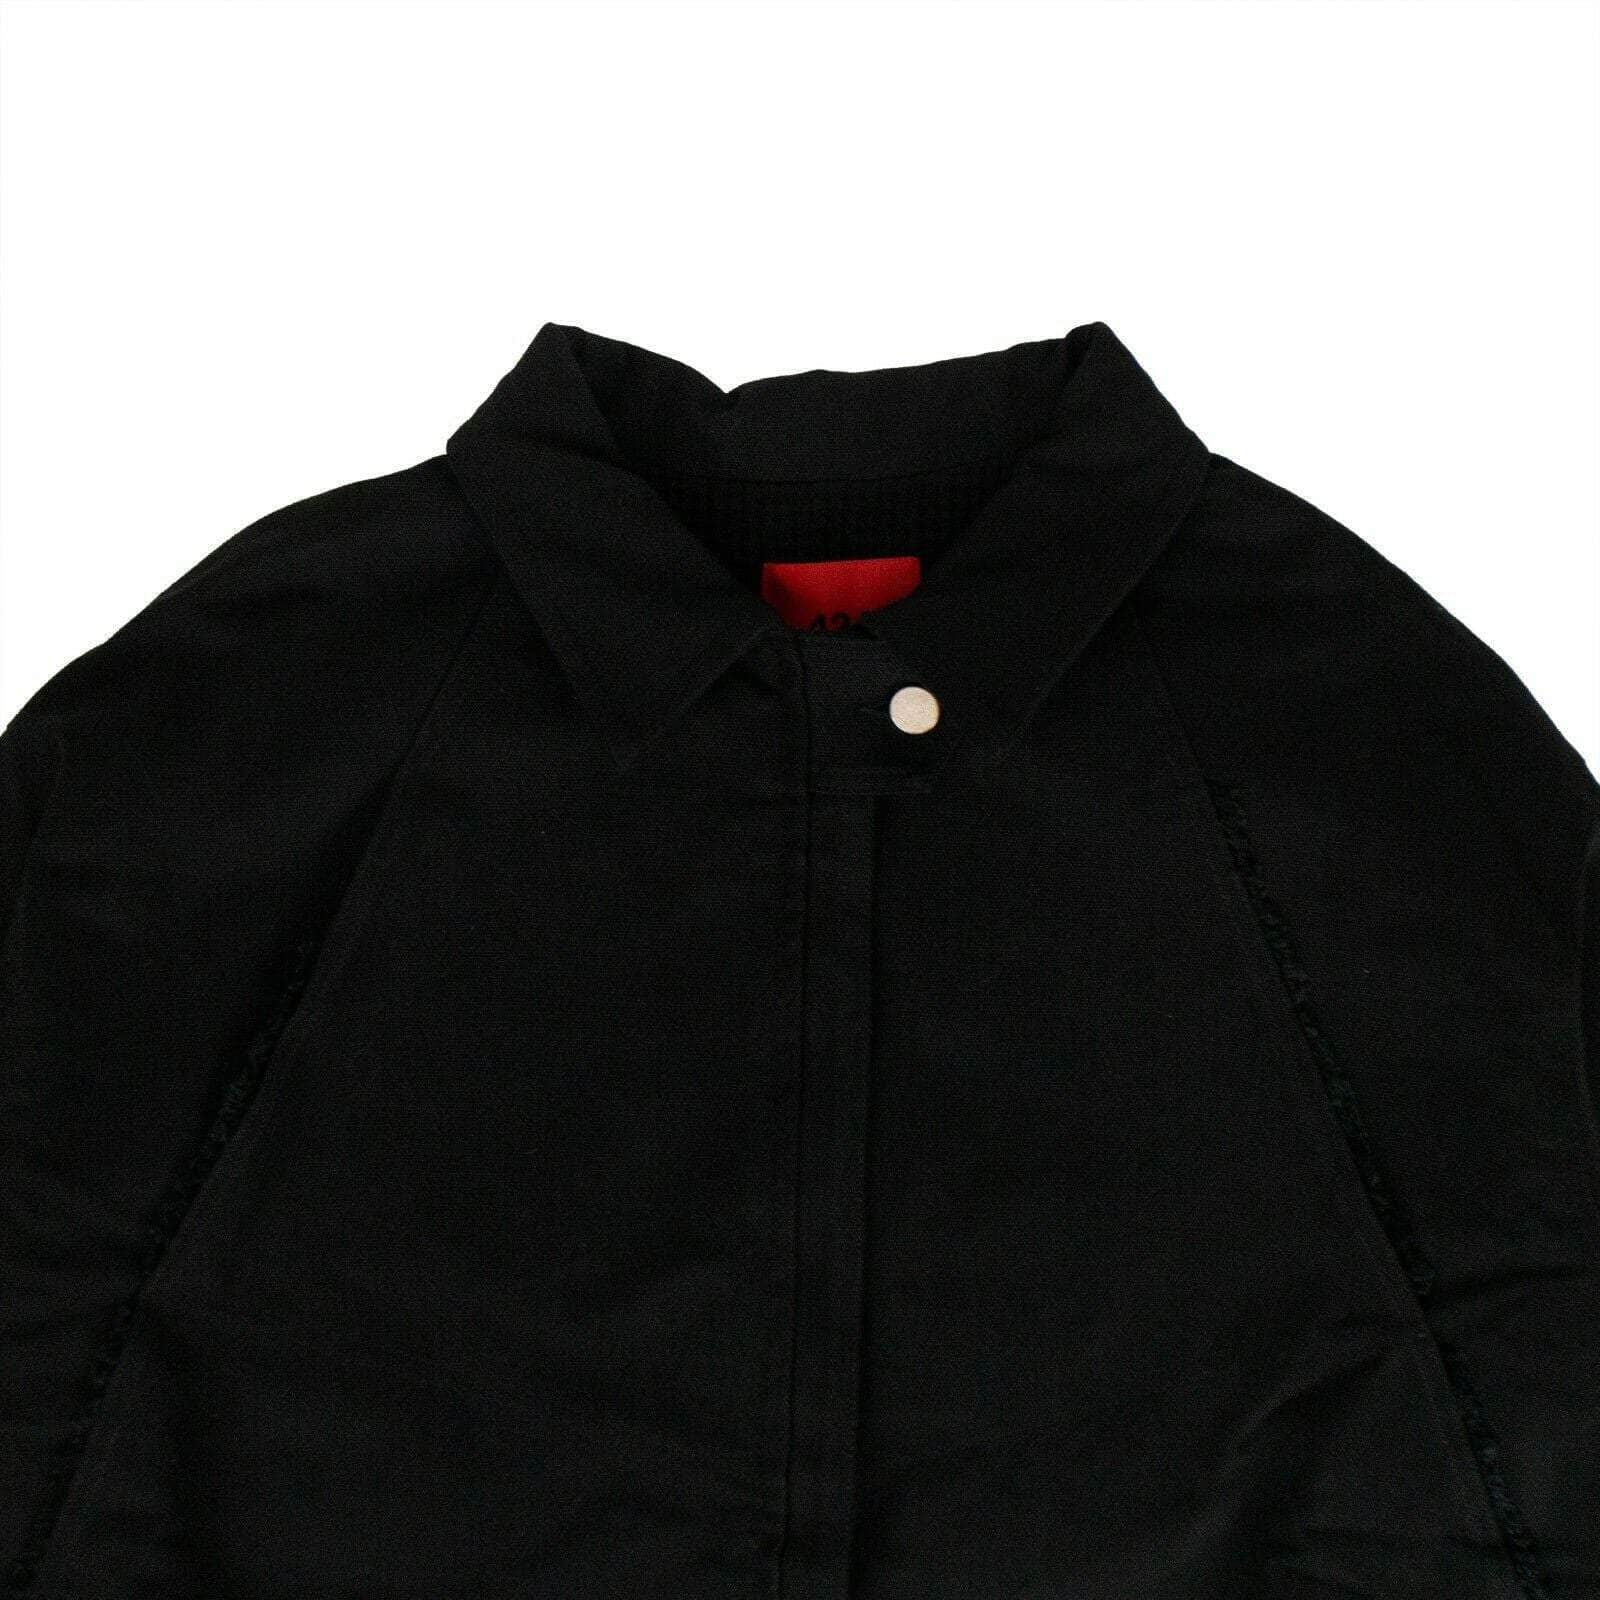 424 ON FAIRFAX 424-on-fairfax, 500-750, couponcollection, gender-mens, jacket, main-clothing, size-l, size-m, size-s, size-xl Collared 'Oversized Teared Canvas' Jacket - Black